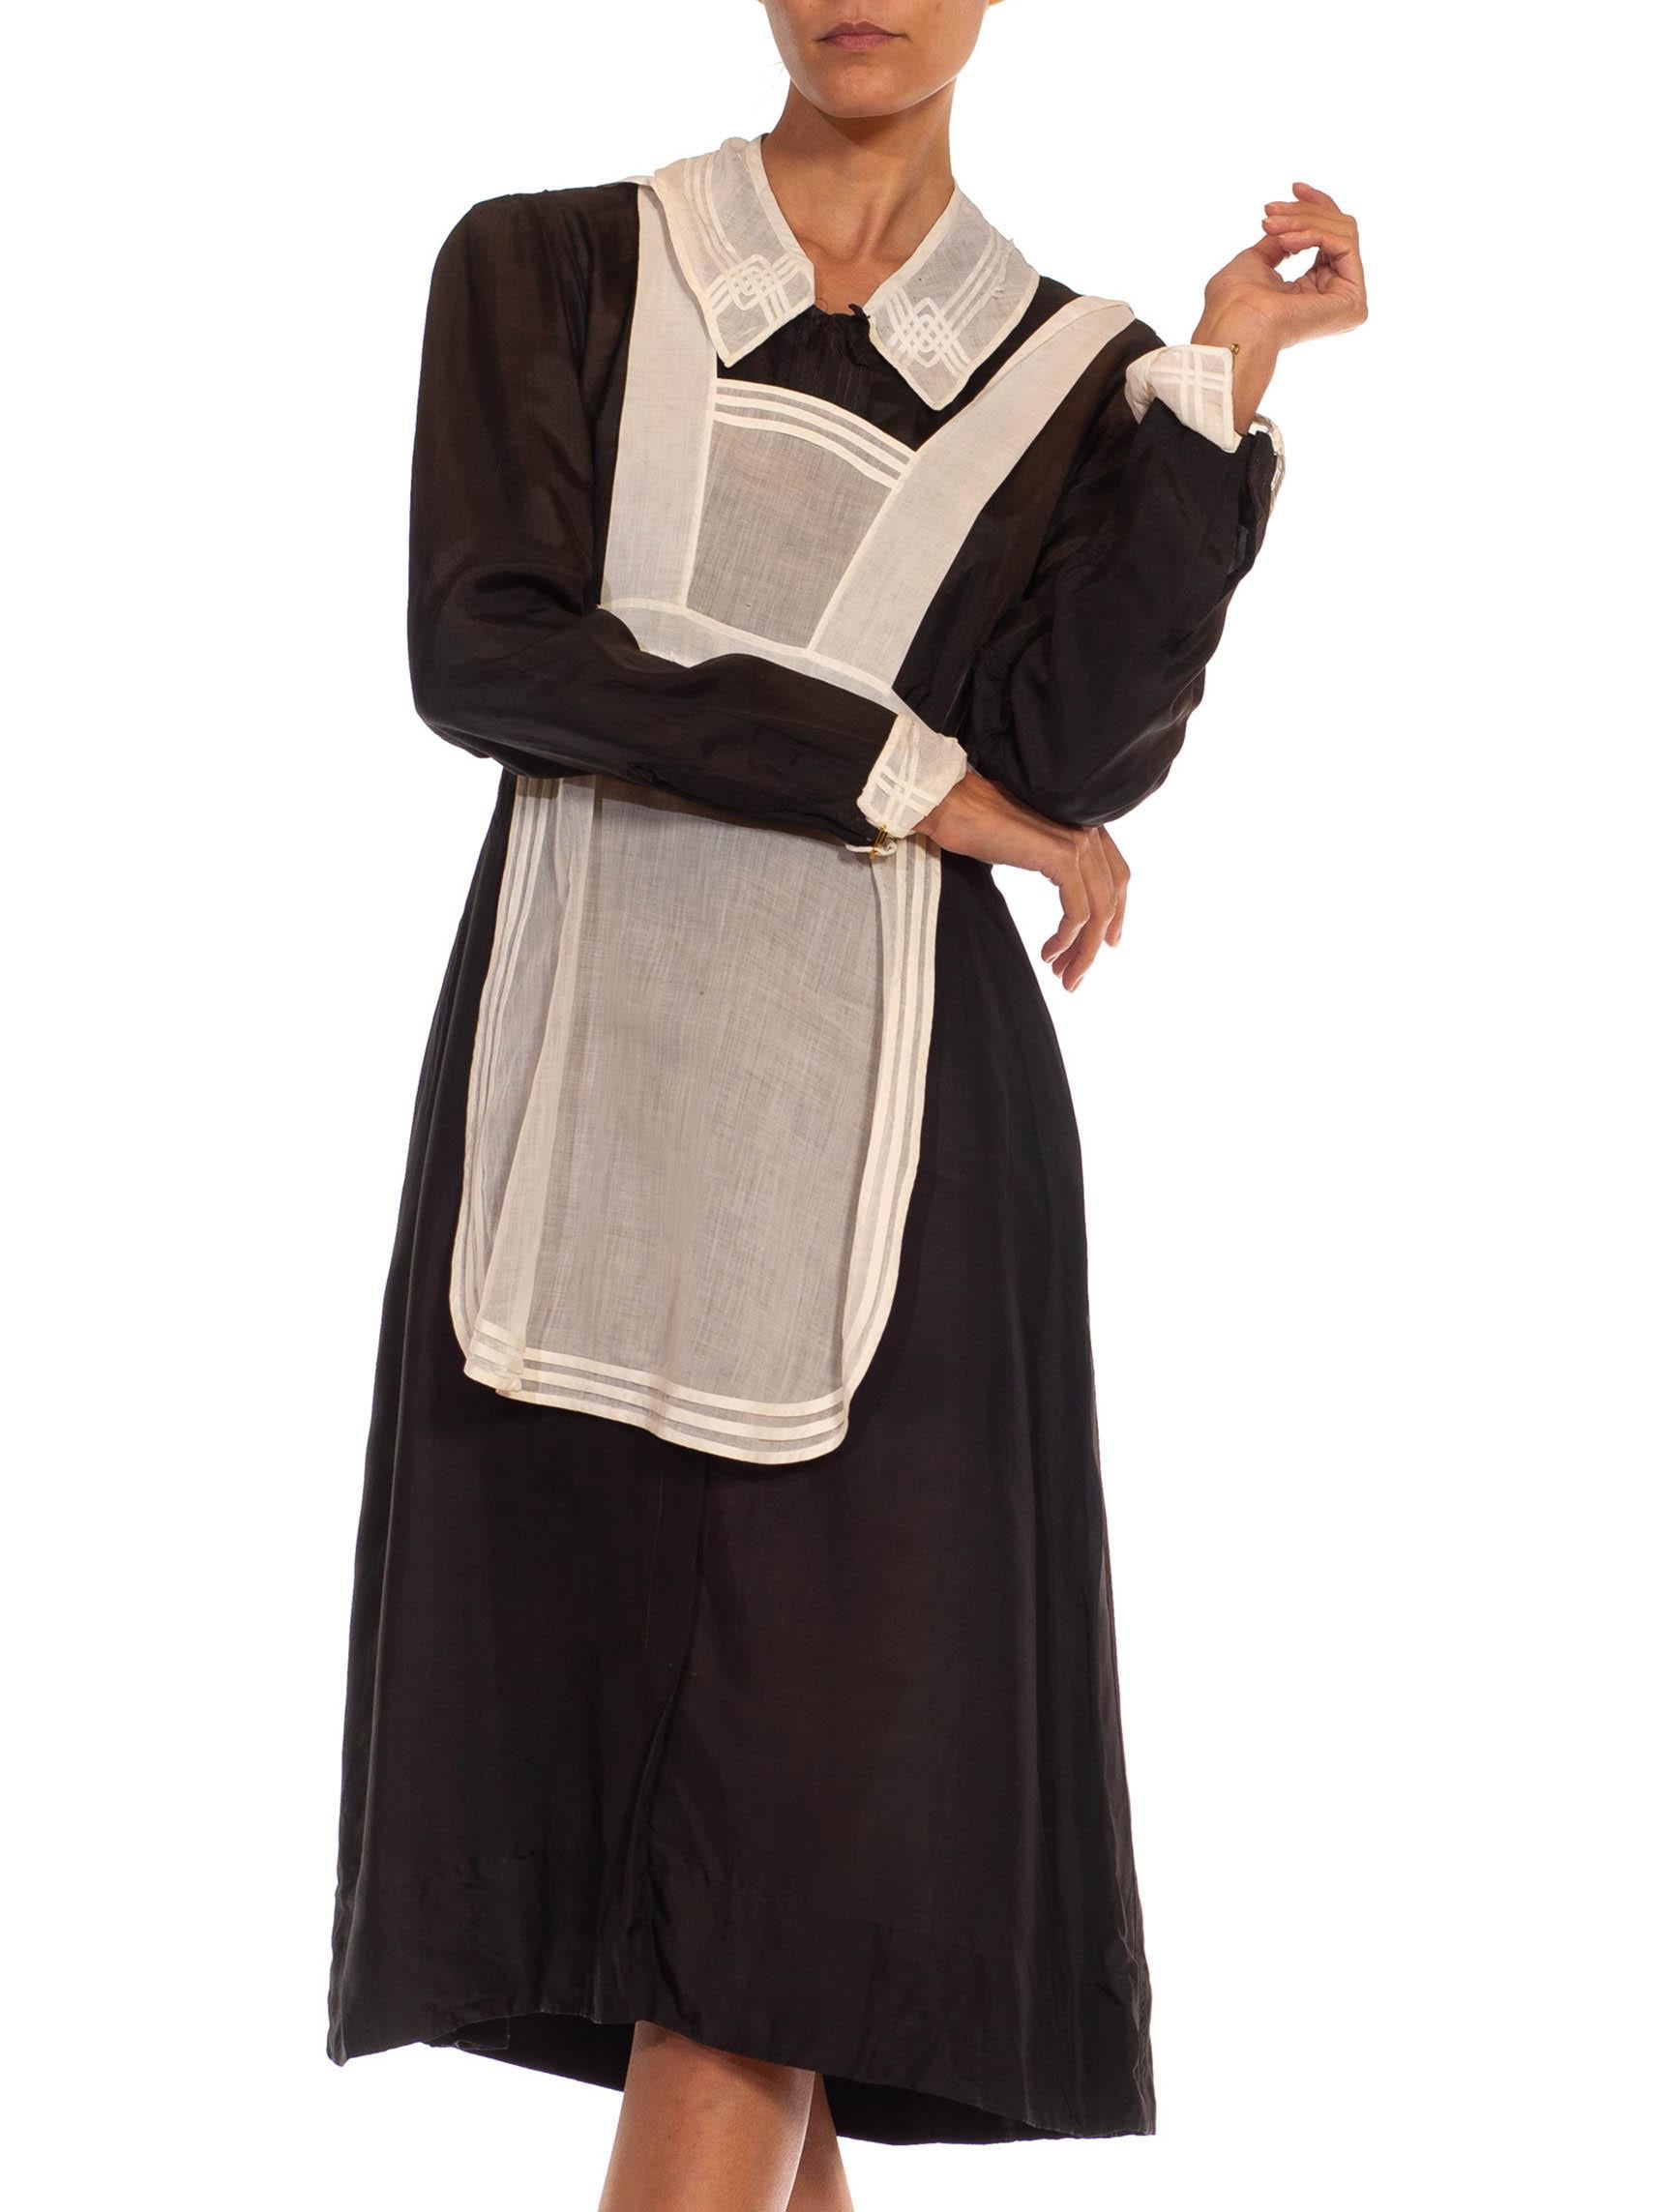 Women's 1930S Black & White Acetate French Maid Dress With Art Deco Trim